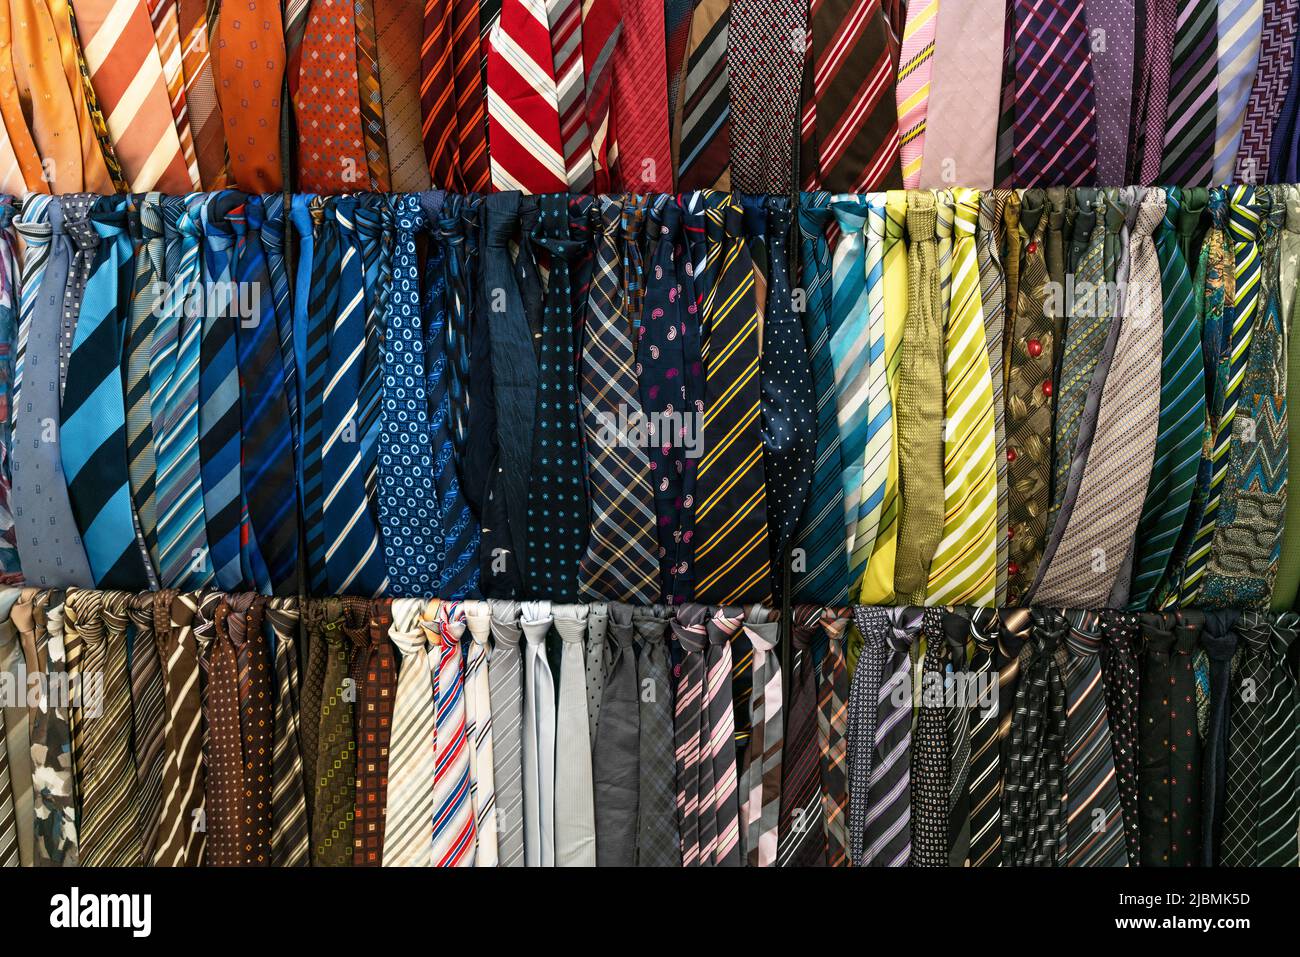 A selection of ties or neckties on display for sale in a mens fashion clothes shop or store Stock Photo